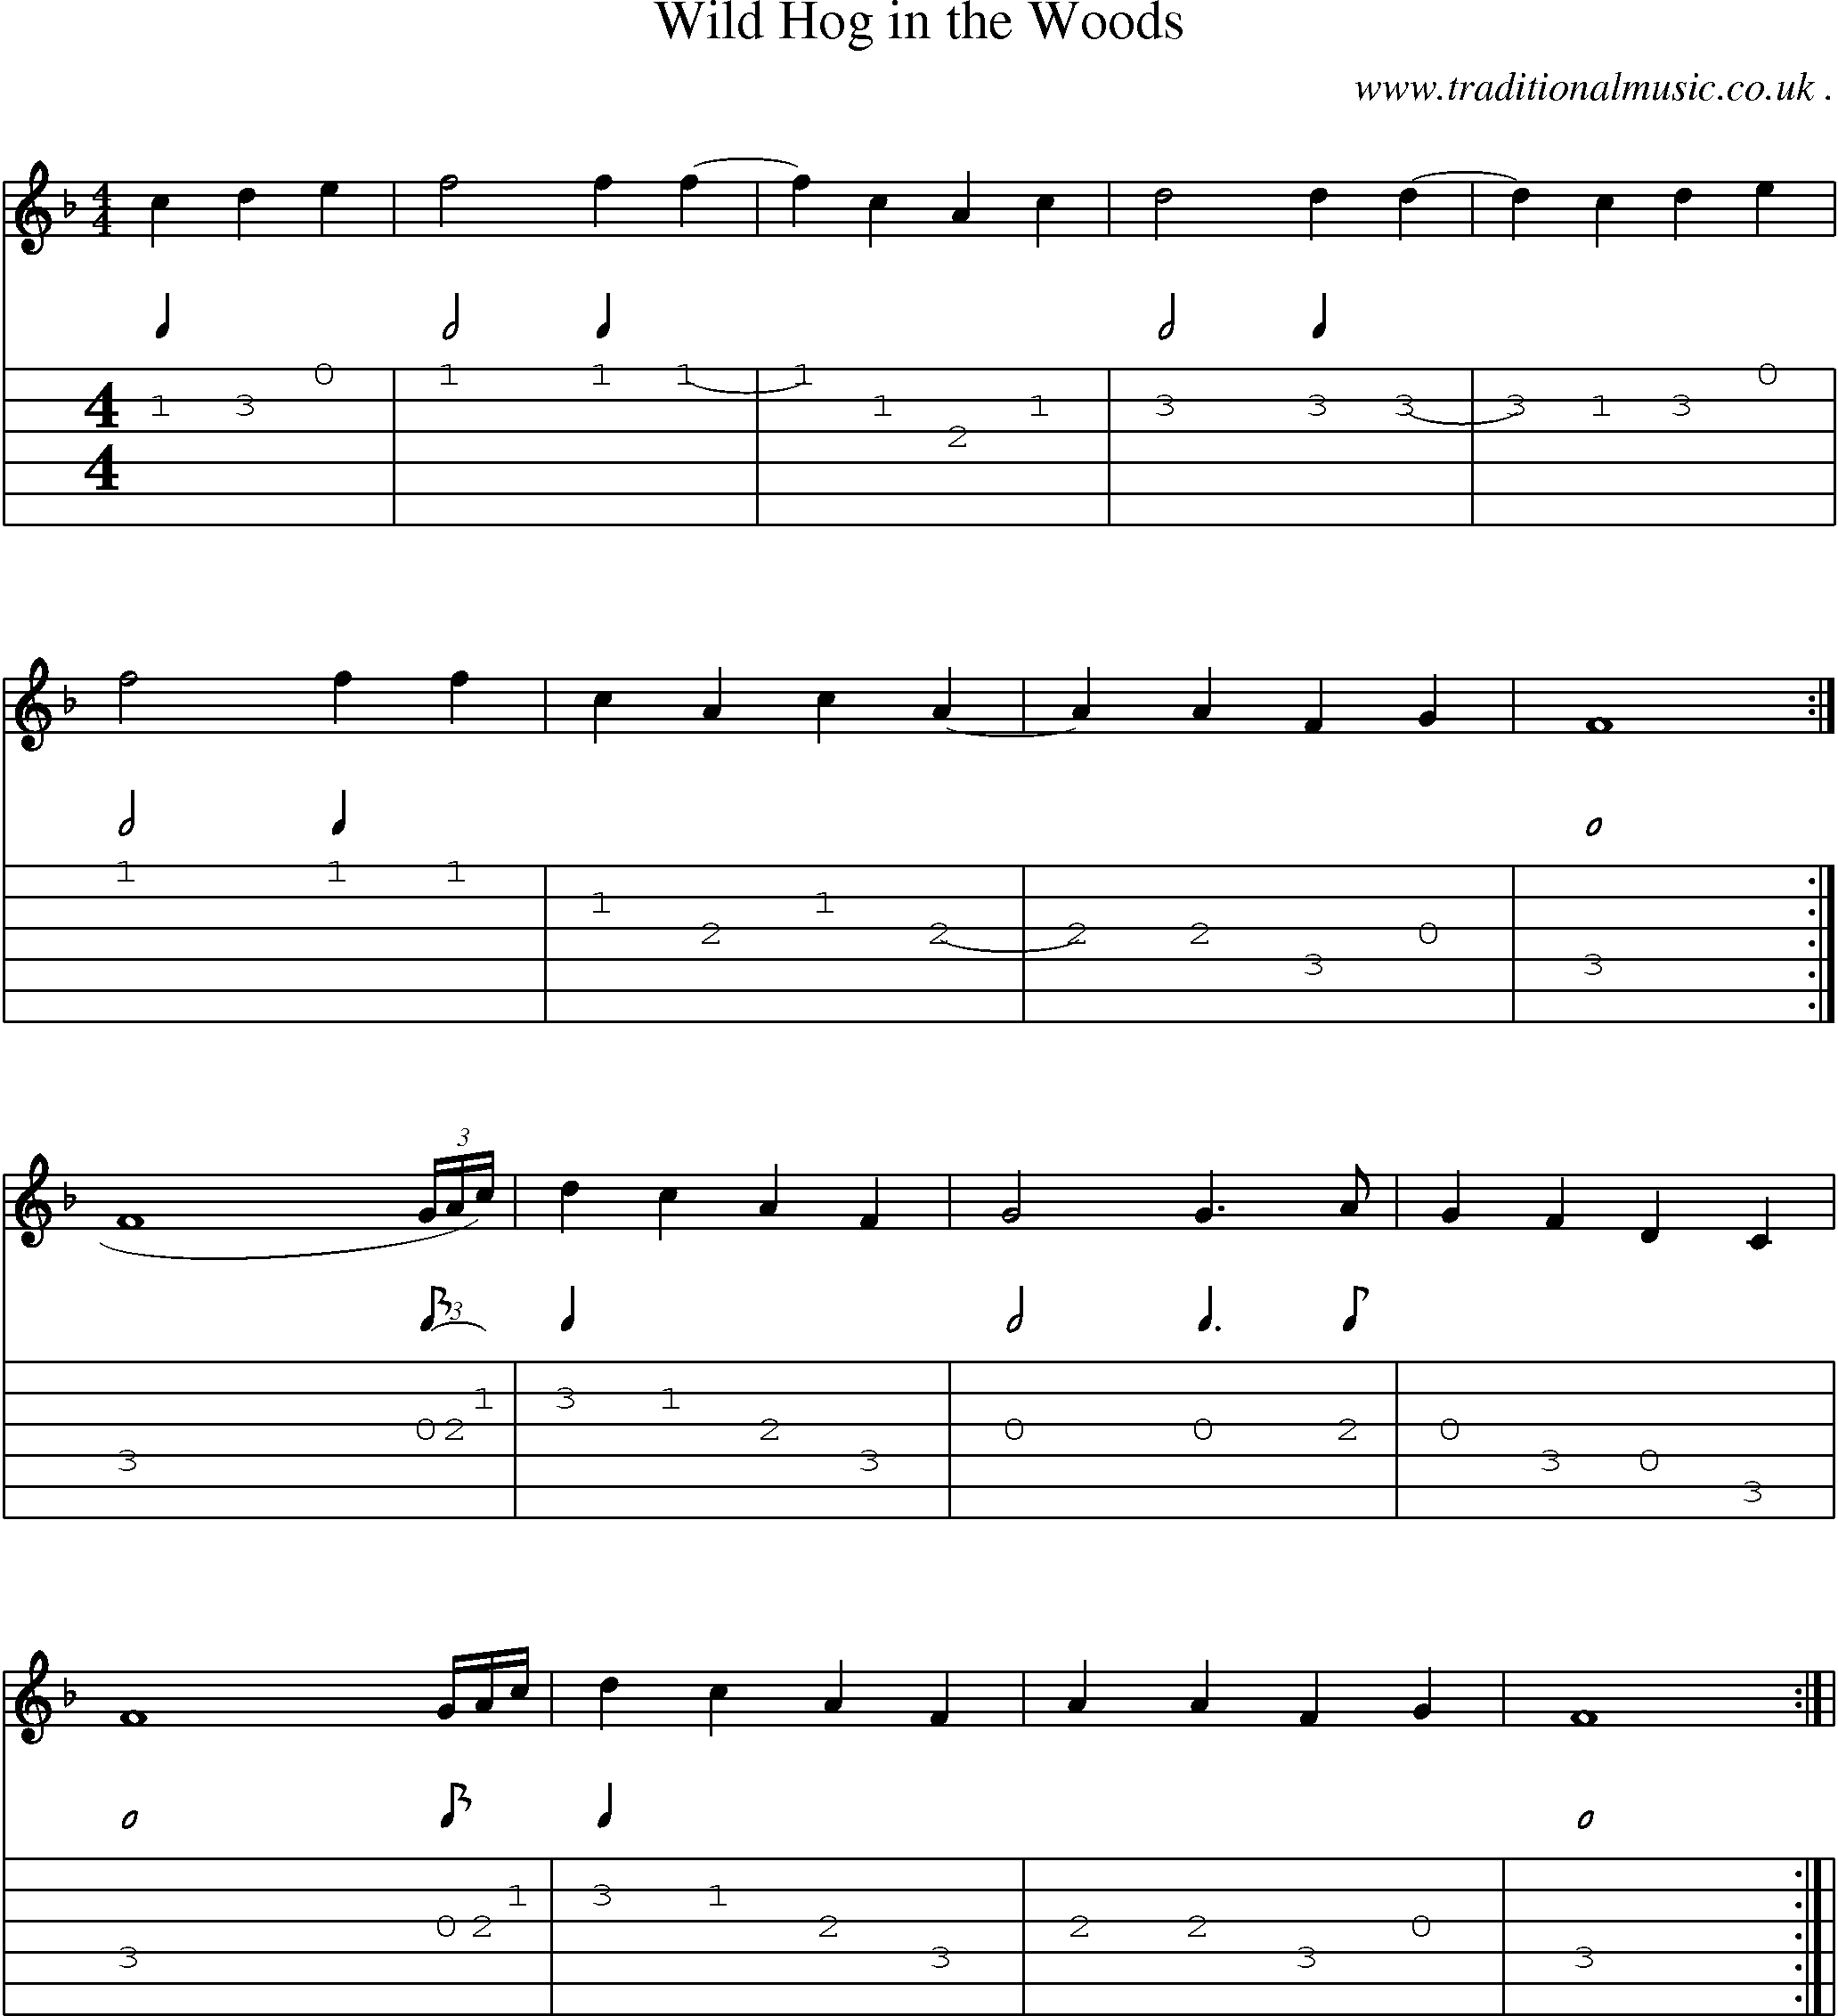 Music Score and Guitar Tabs for Wild Hog In The Woods